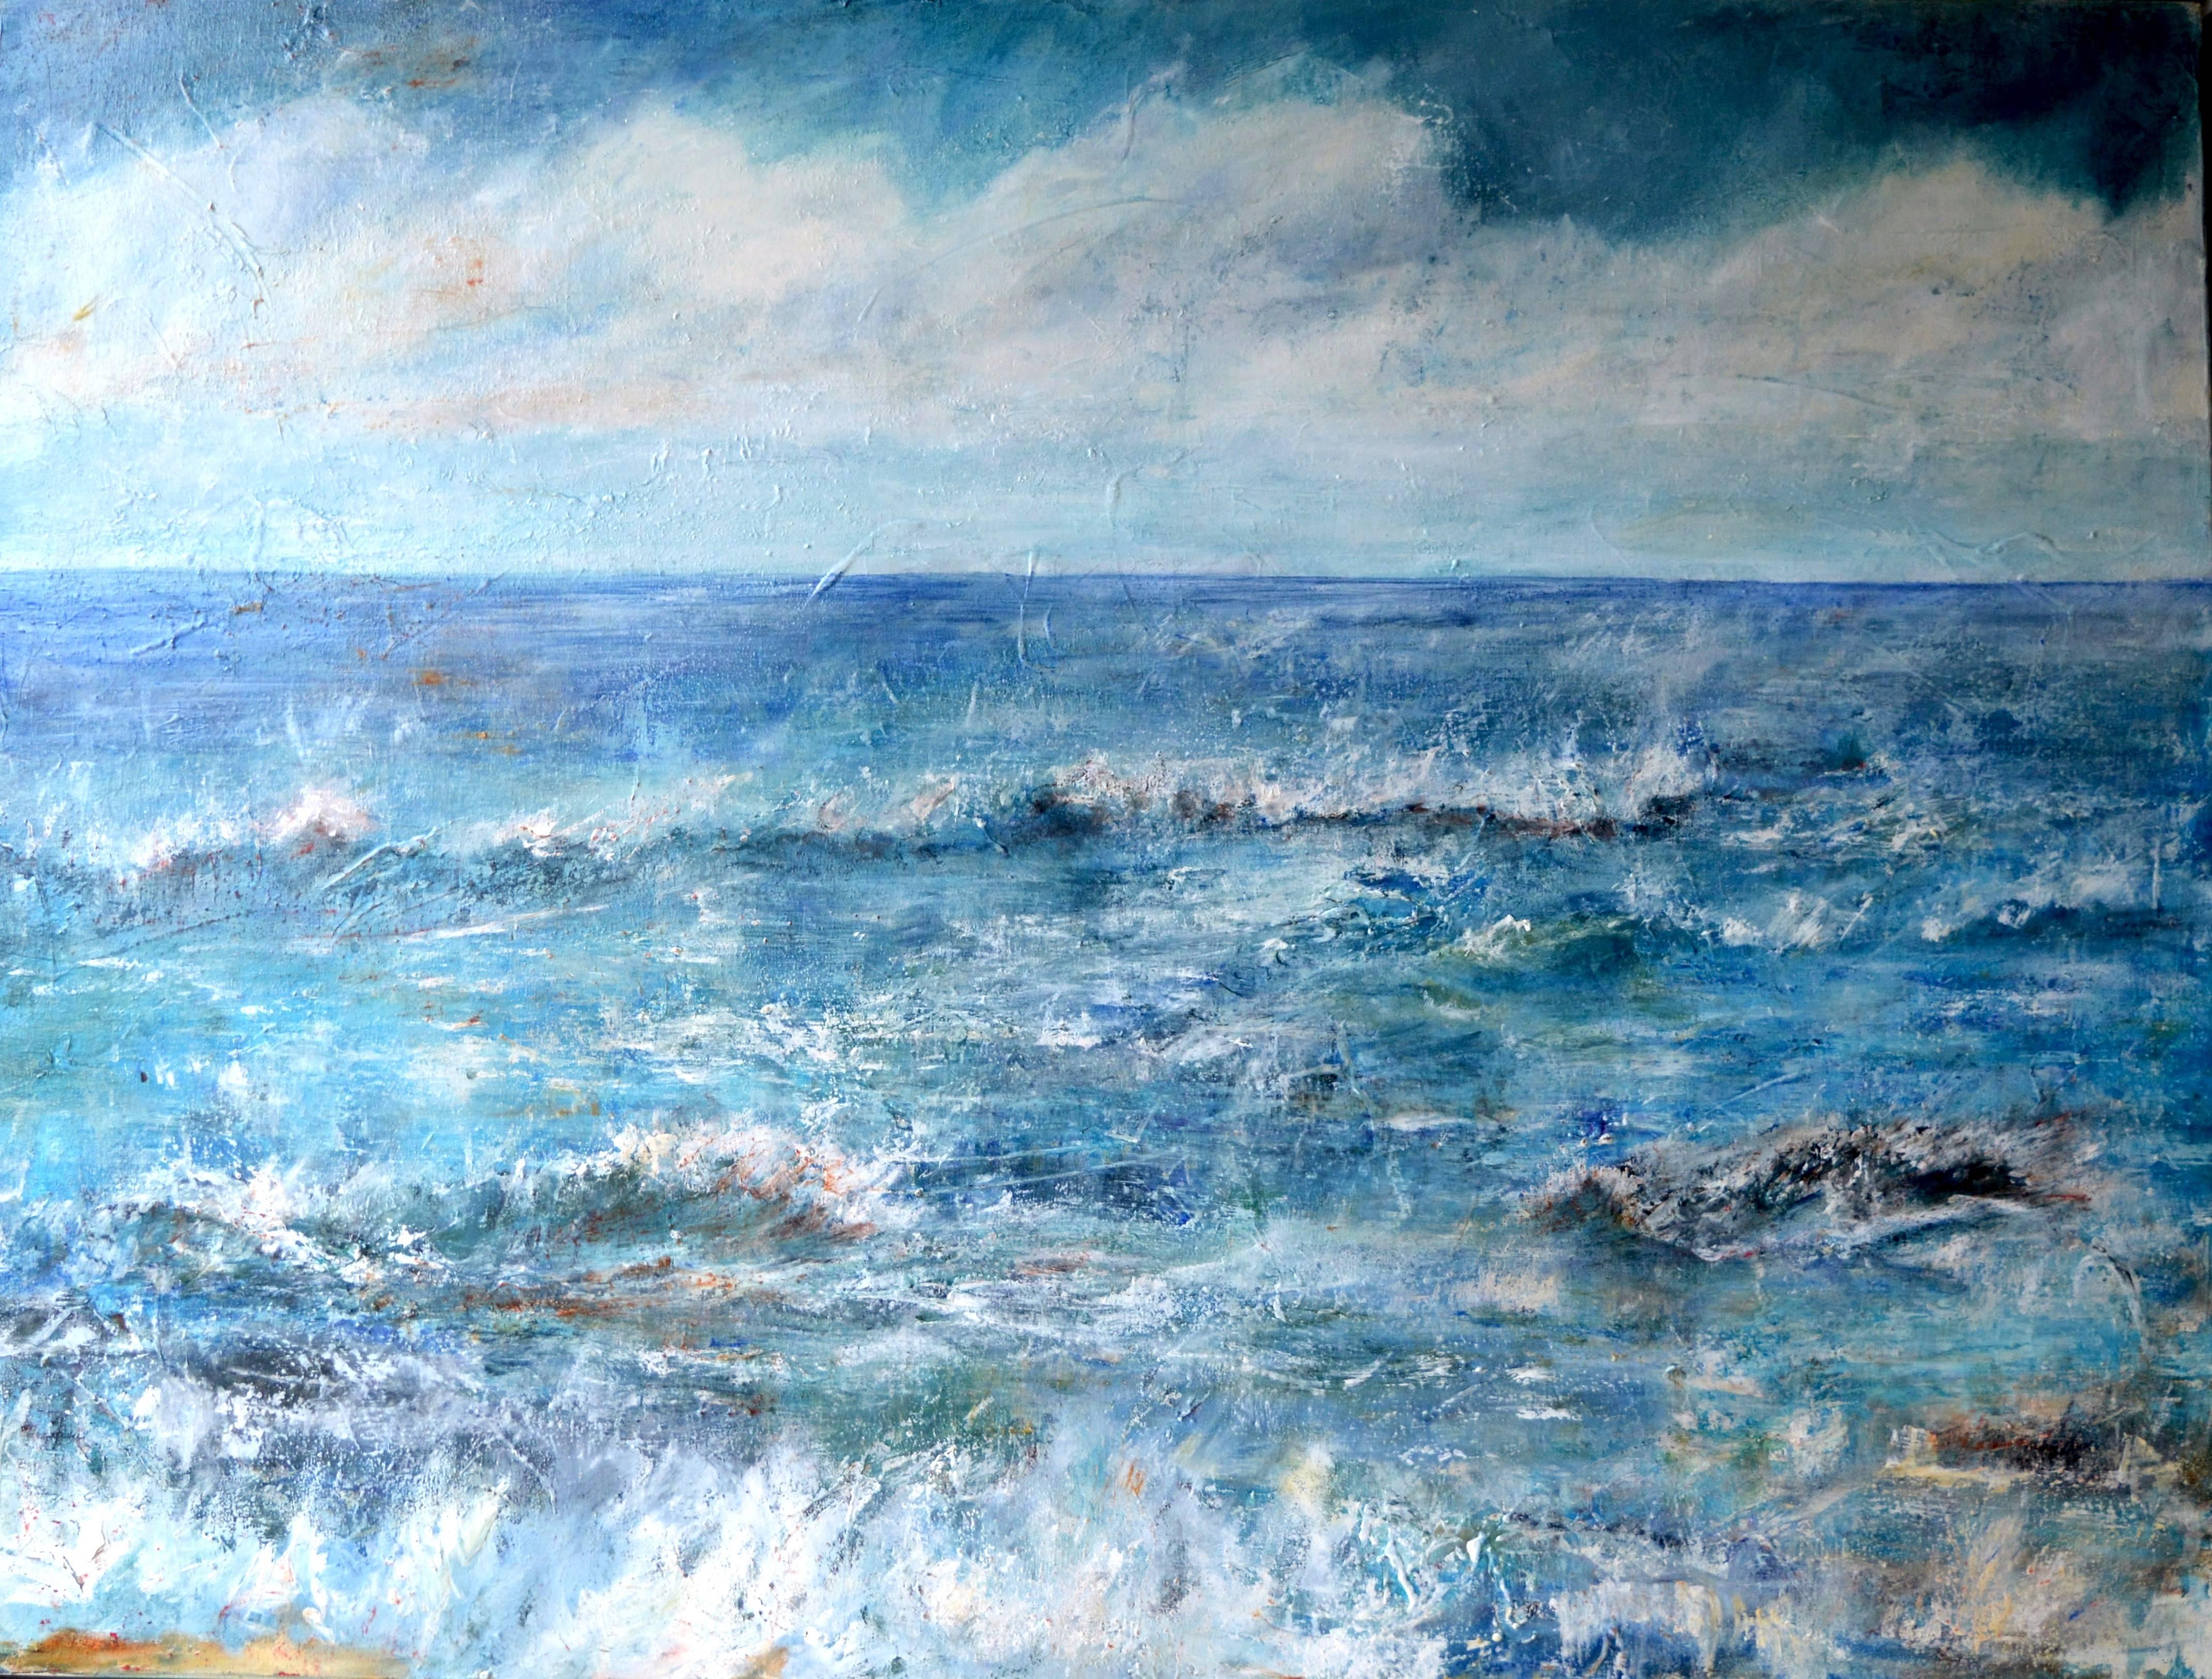 Listen To The Sound Of The Sea, Contemporary Seascape Oil Painting